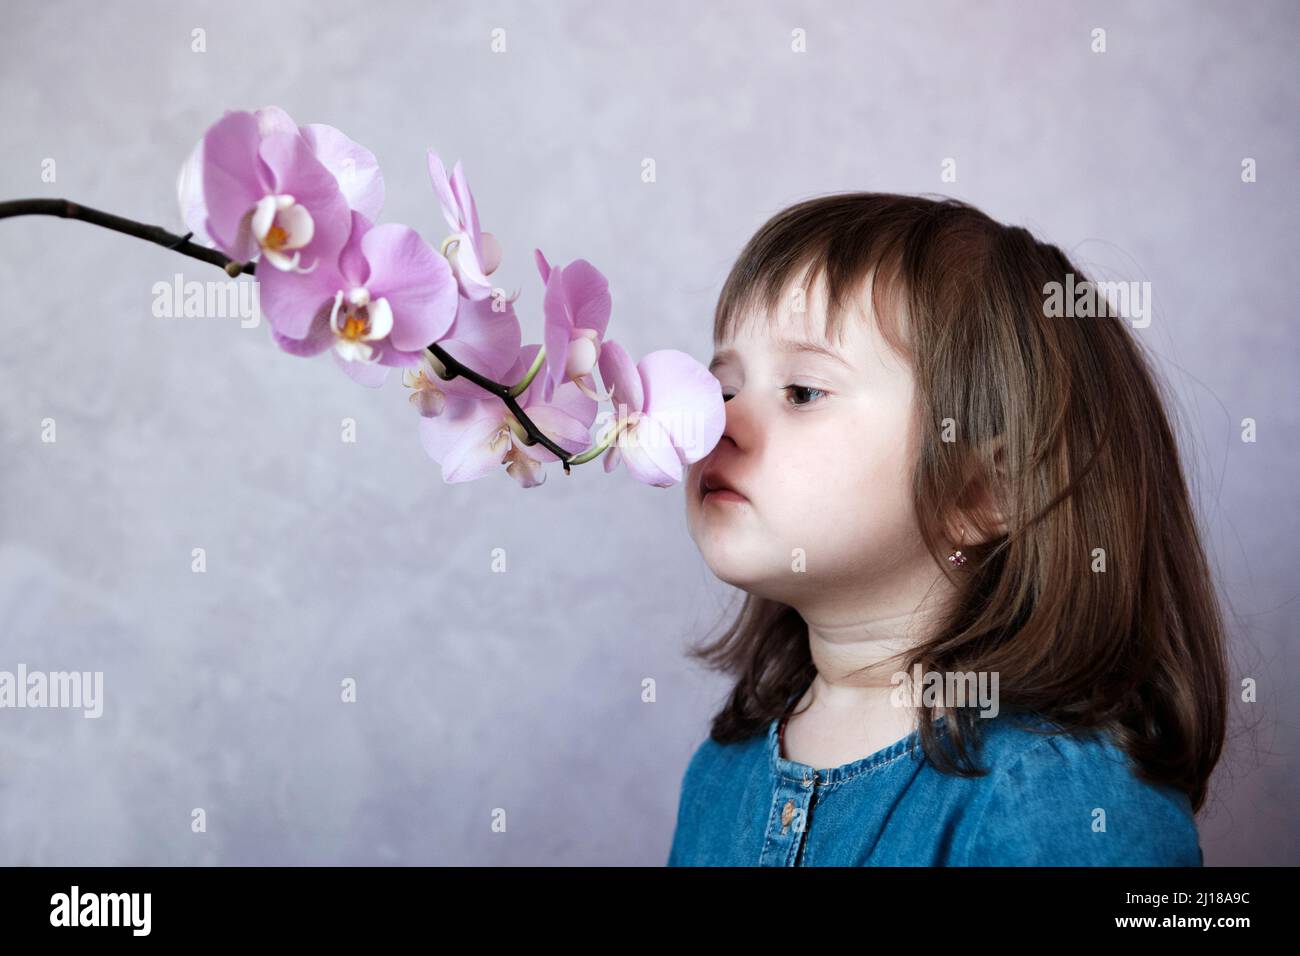 Little girl smelling pink orchid flower. Baby Girl Smelling Flowers Stock Photo